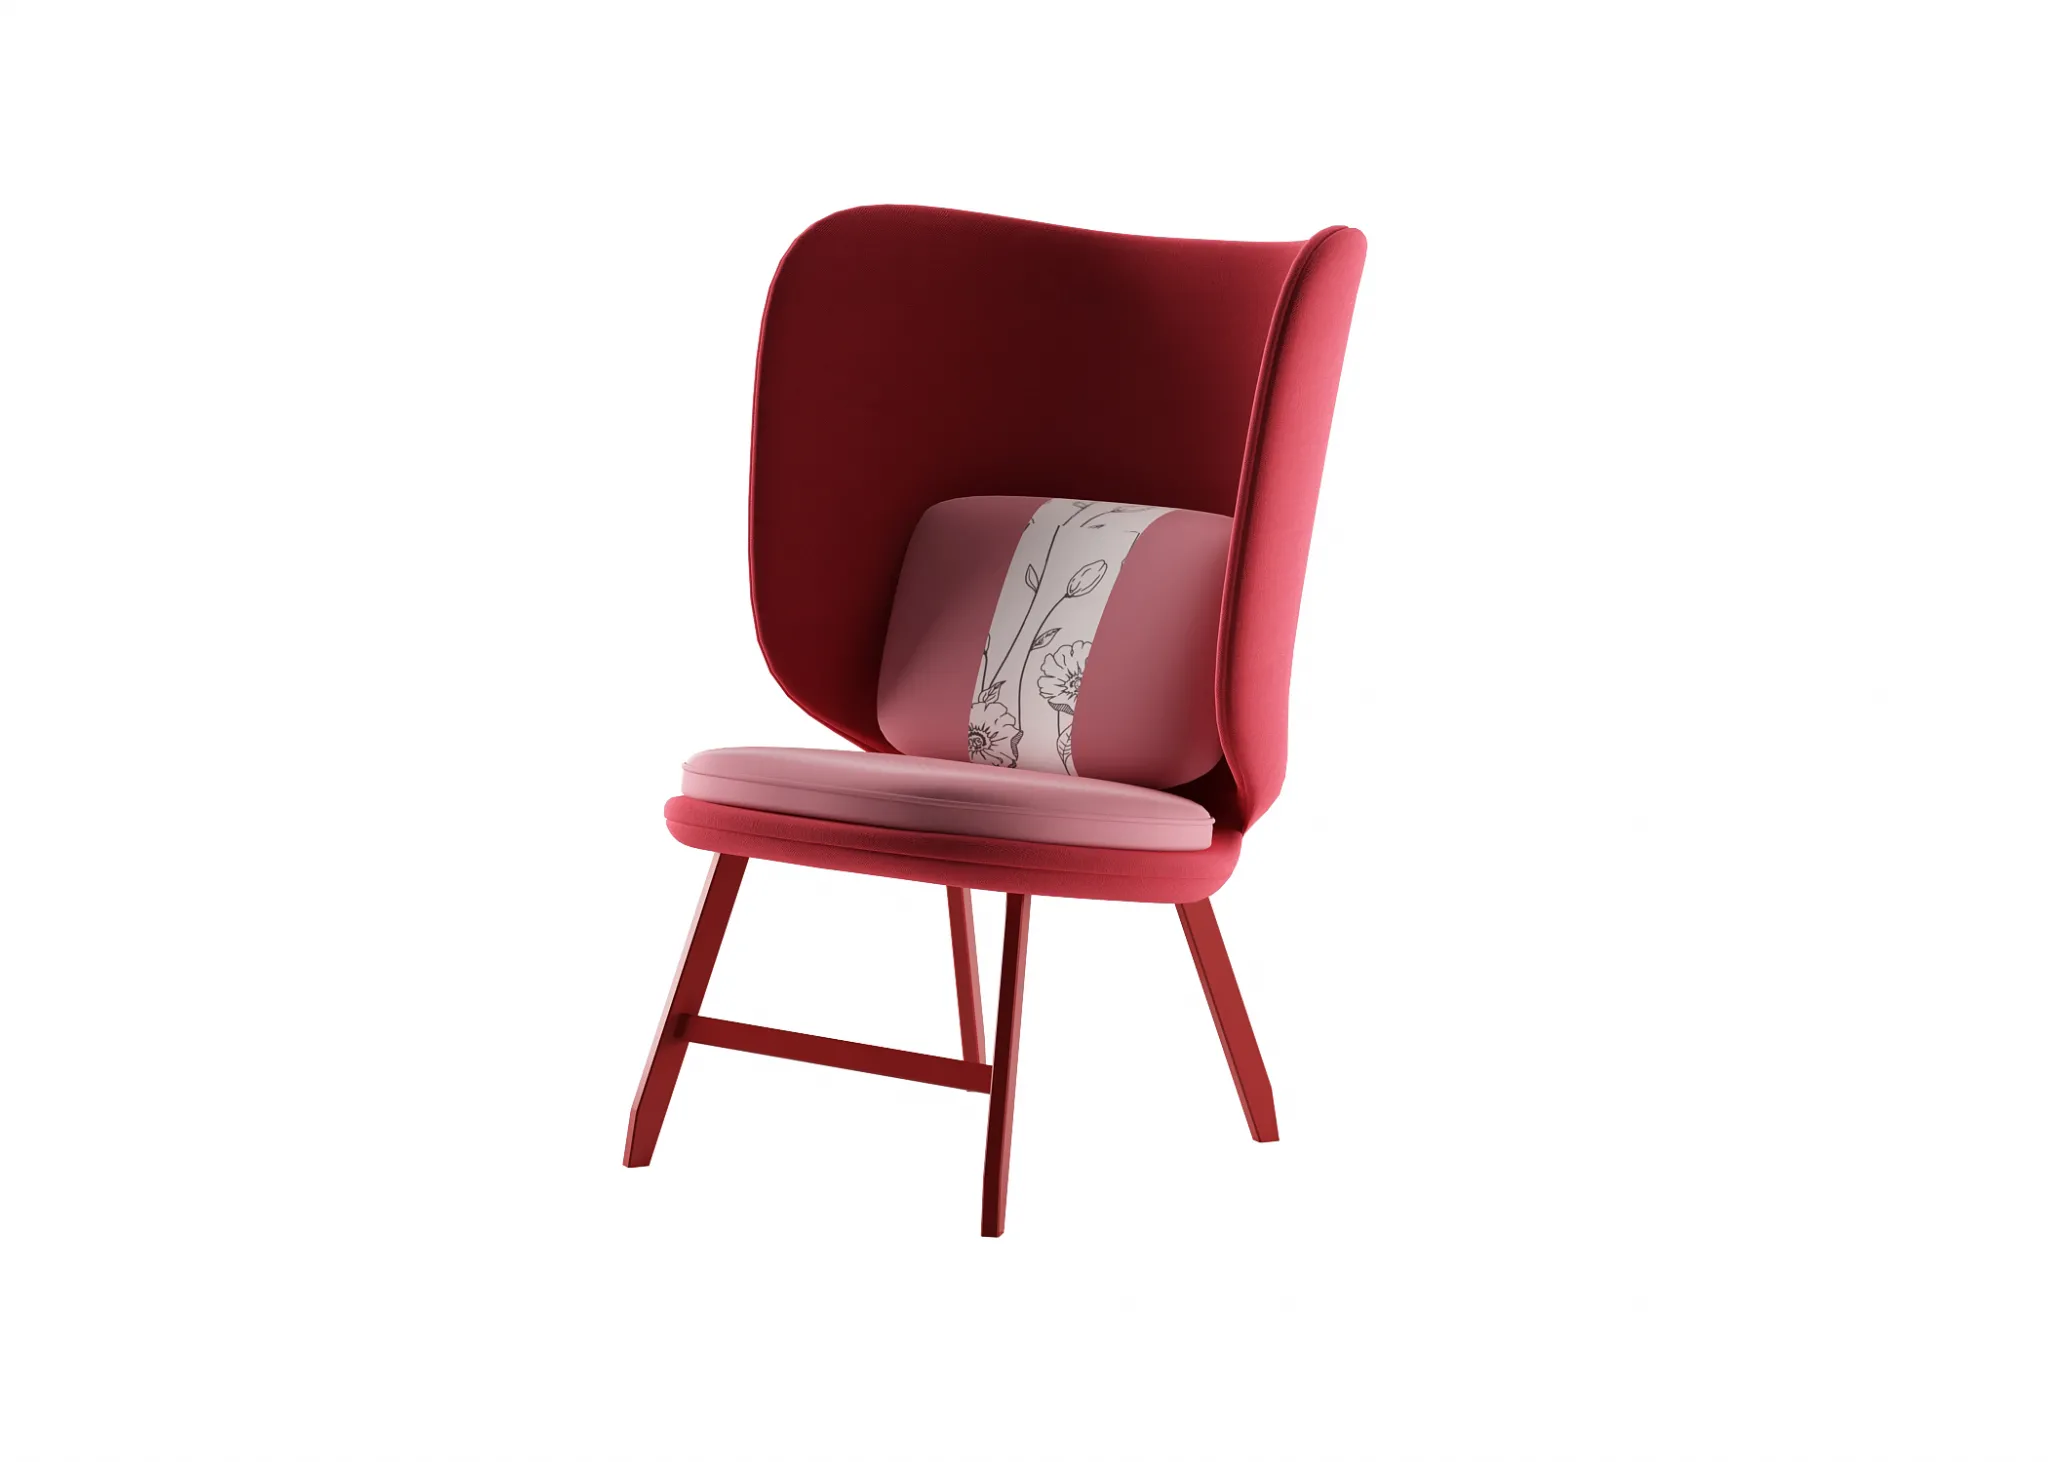 FURNITURE 3D MODELS – CHAIRS – 0019